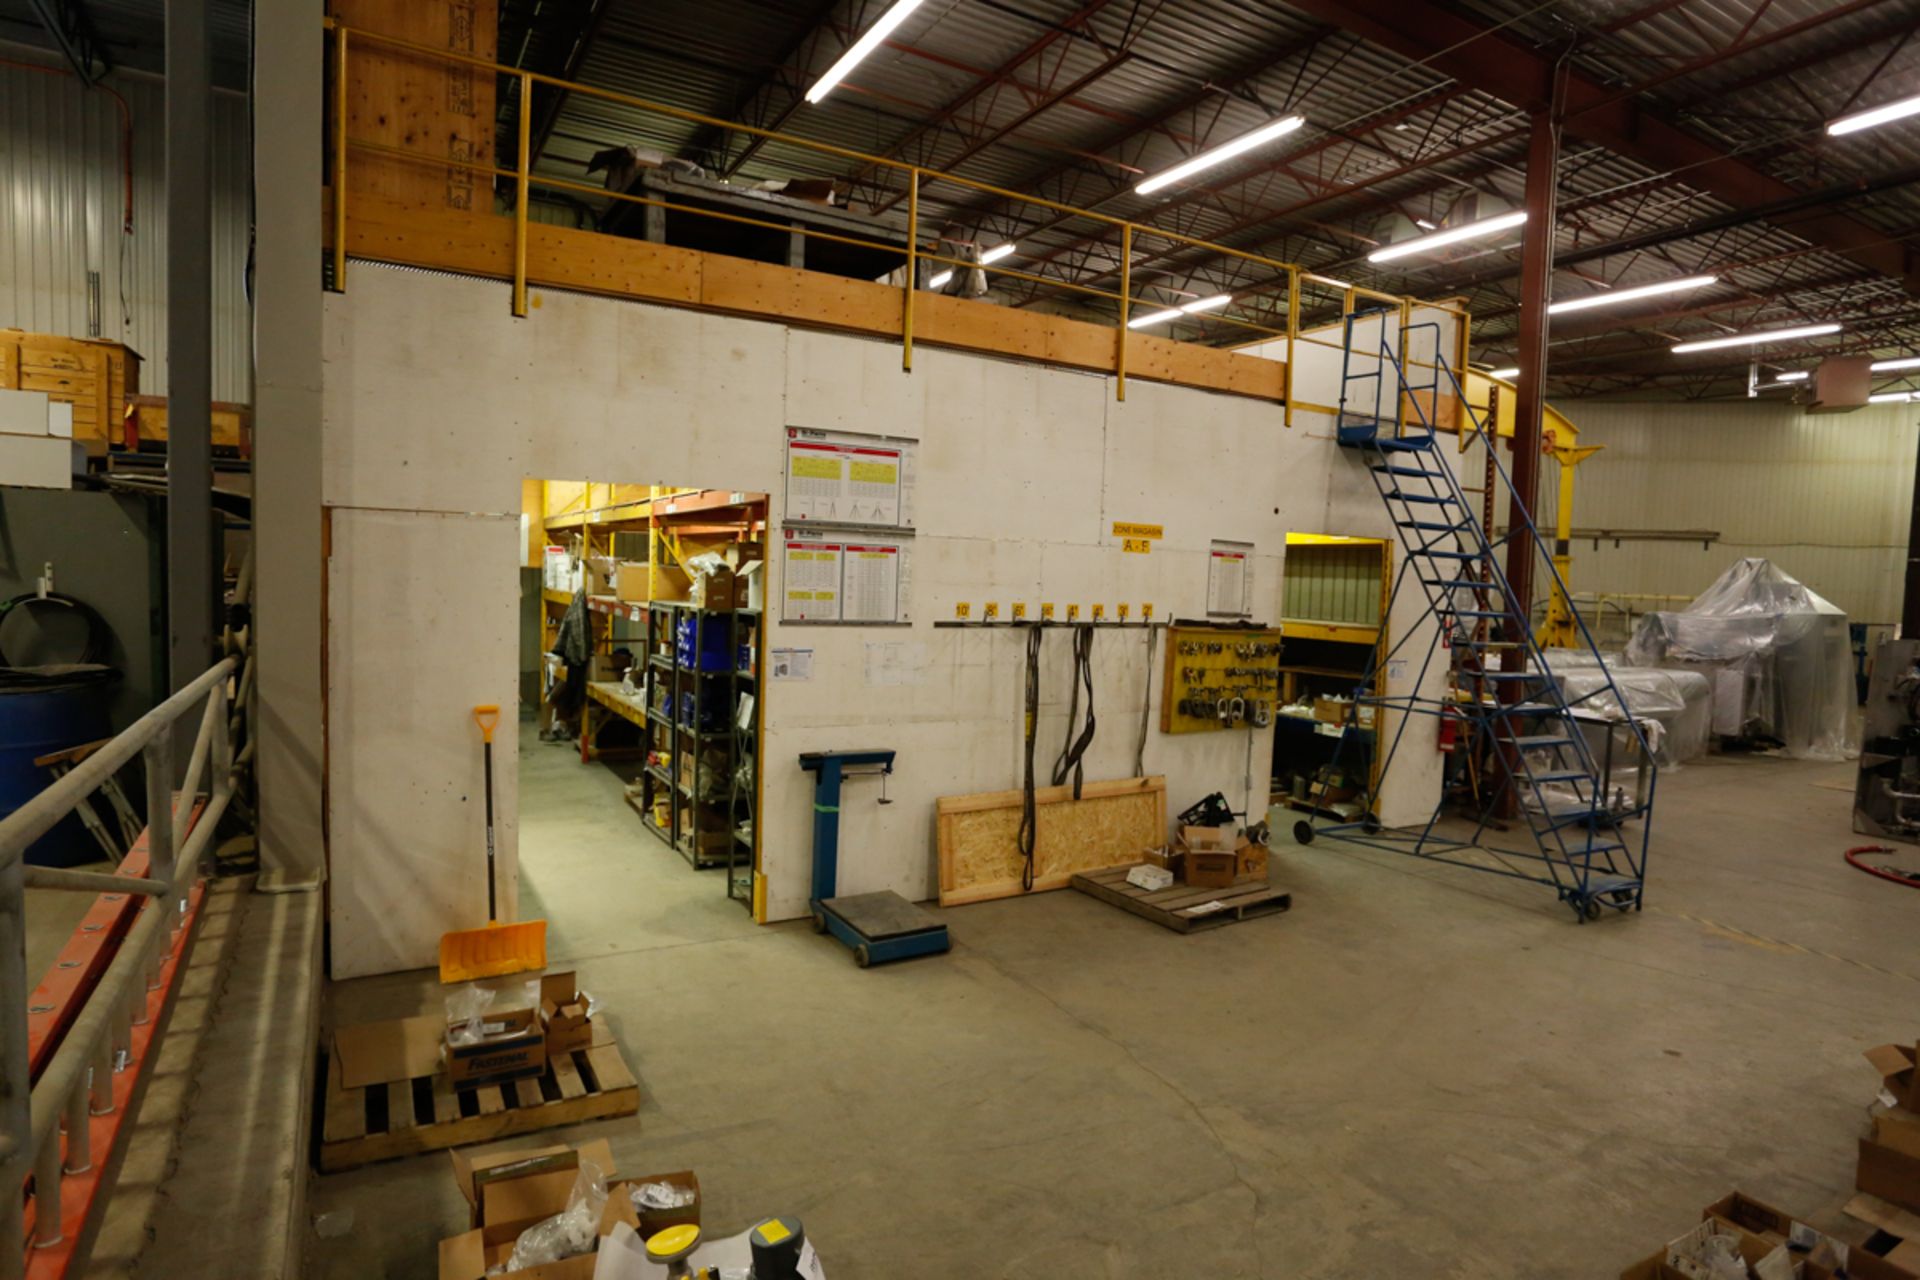 30' X 28' X 12' HIGH MEZZANINE COMPRISING OF 15 SECTIONS OF RACKING, FLOOR & GUARDRAIL